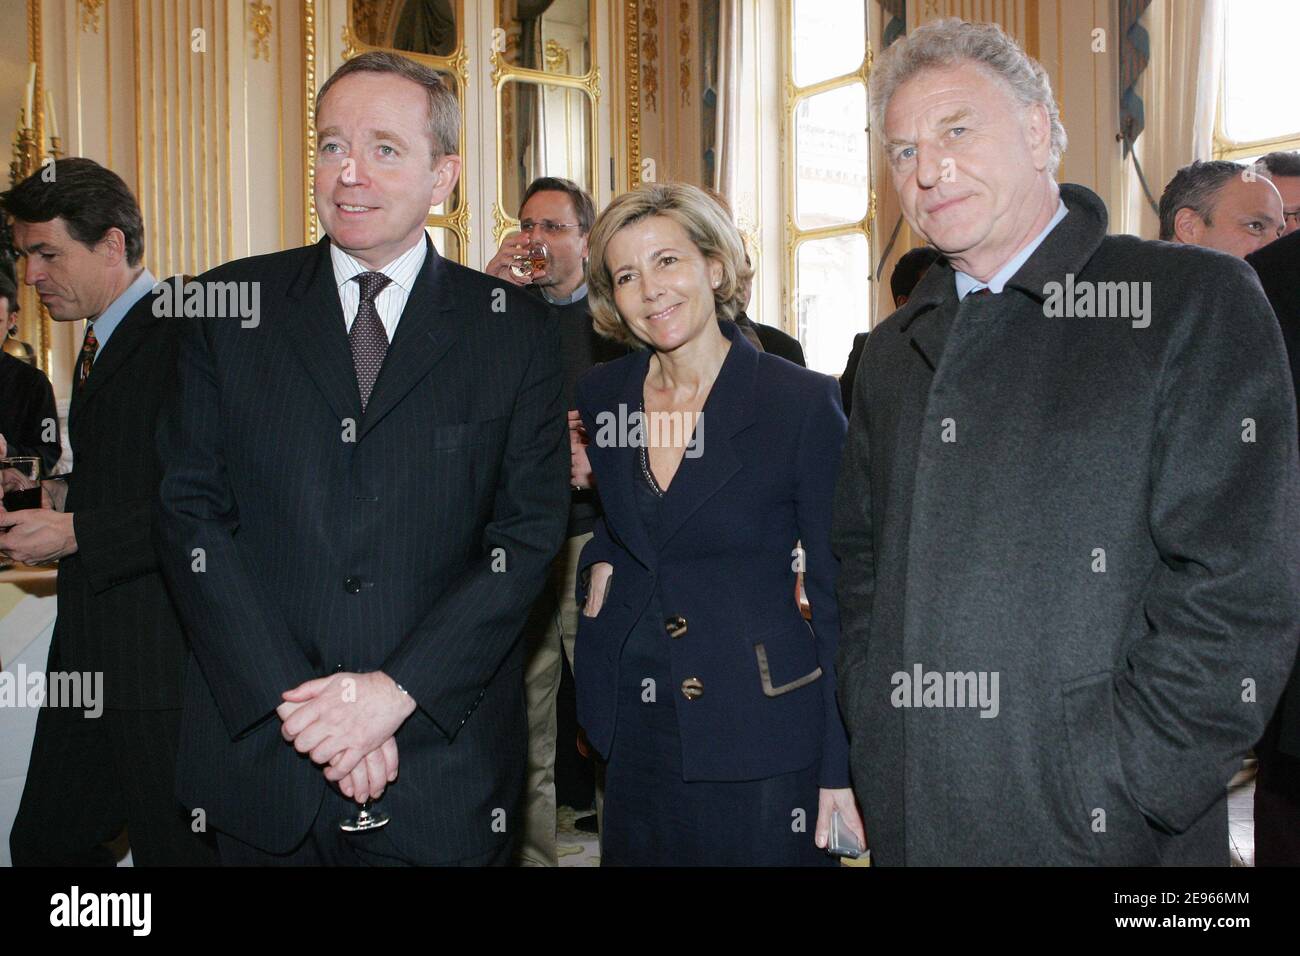 French culture minister Renaud Donnedieu de Vabres, French journalists Claire Chazal and Robert Namias attend French actress Karin Viard and French PR Dominique Segall receiving the 'Chevalier dans l'ordre des Arts et Lettres' medal from French culture minister Renaud Donnedieu de Vabres during a ceremony held at the ministry in Paris, France on March 17, 2006. Photo by Thierry Orban/ABACAPRESS.COM Stock Photo